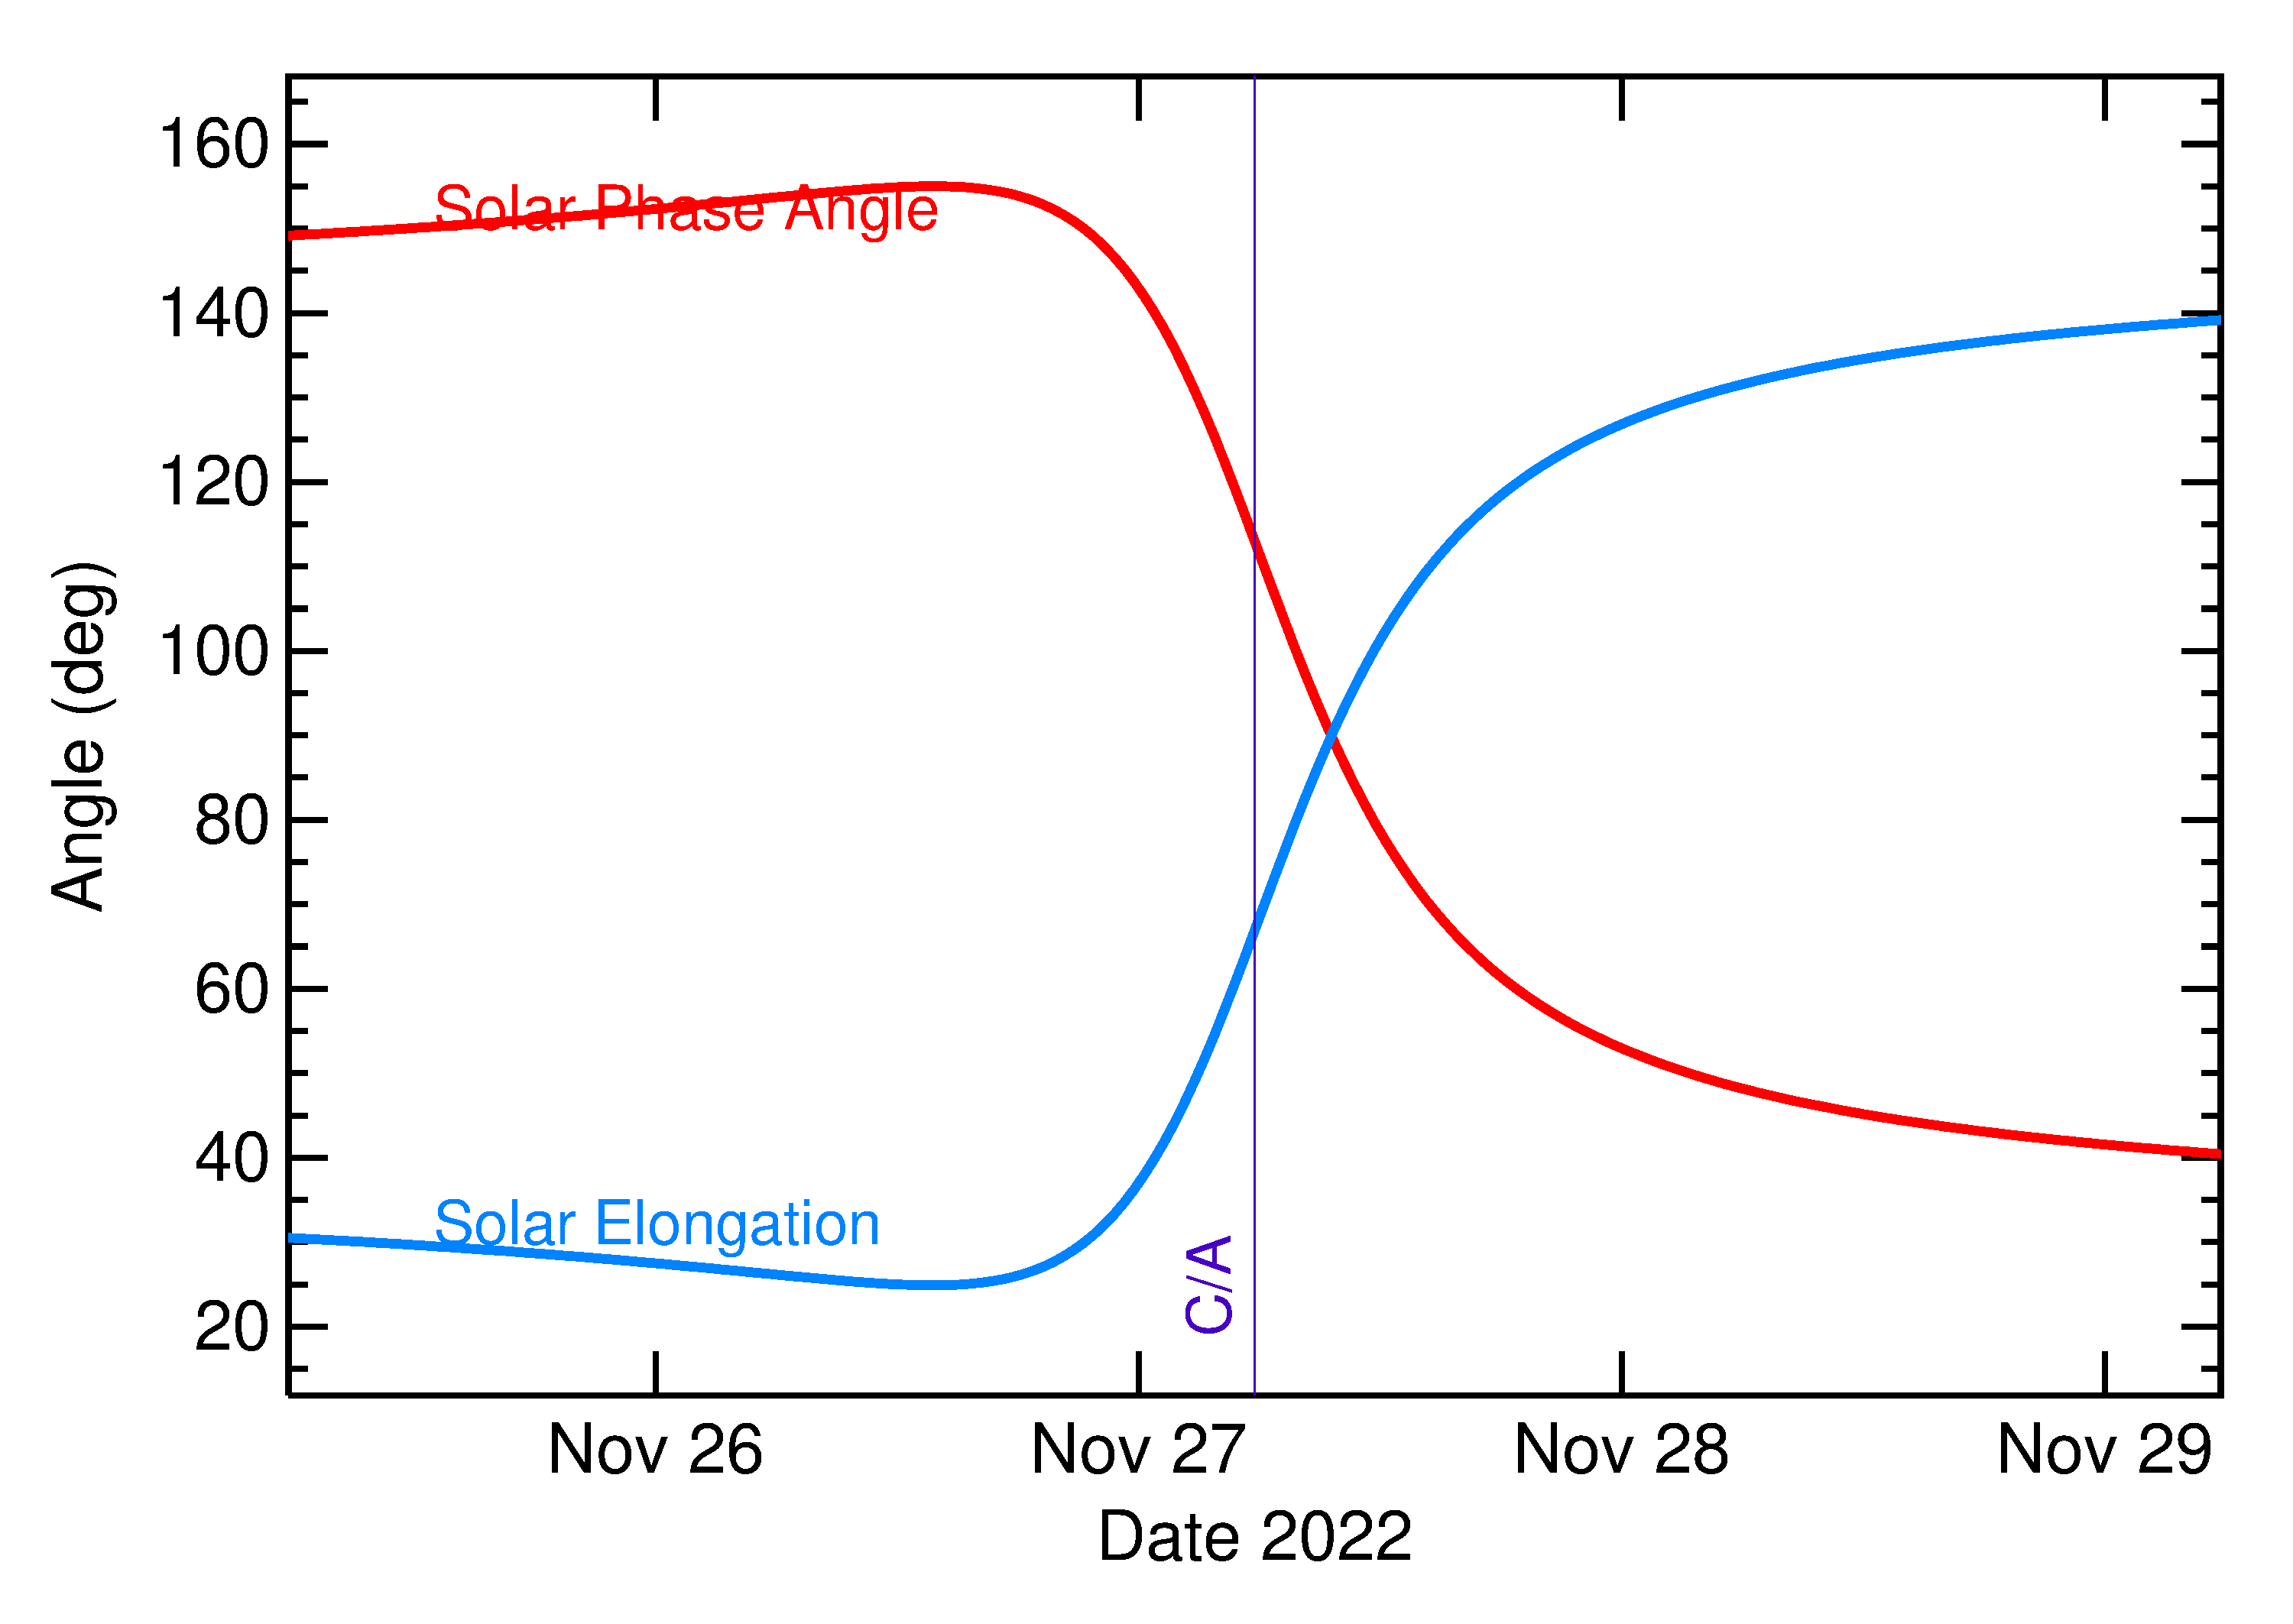 Solar Elongation and Solar Phase Angle of 2022 WS10 in the days around closest approach